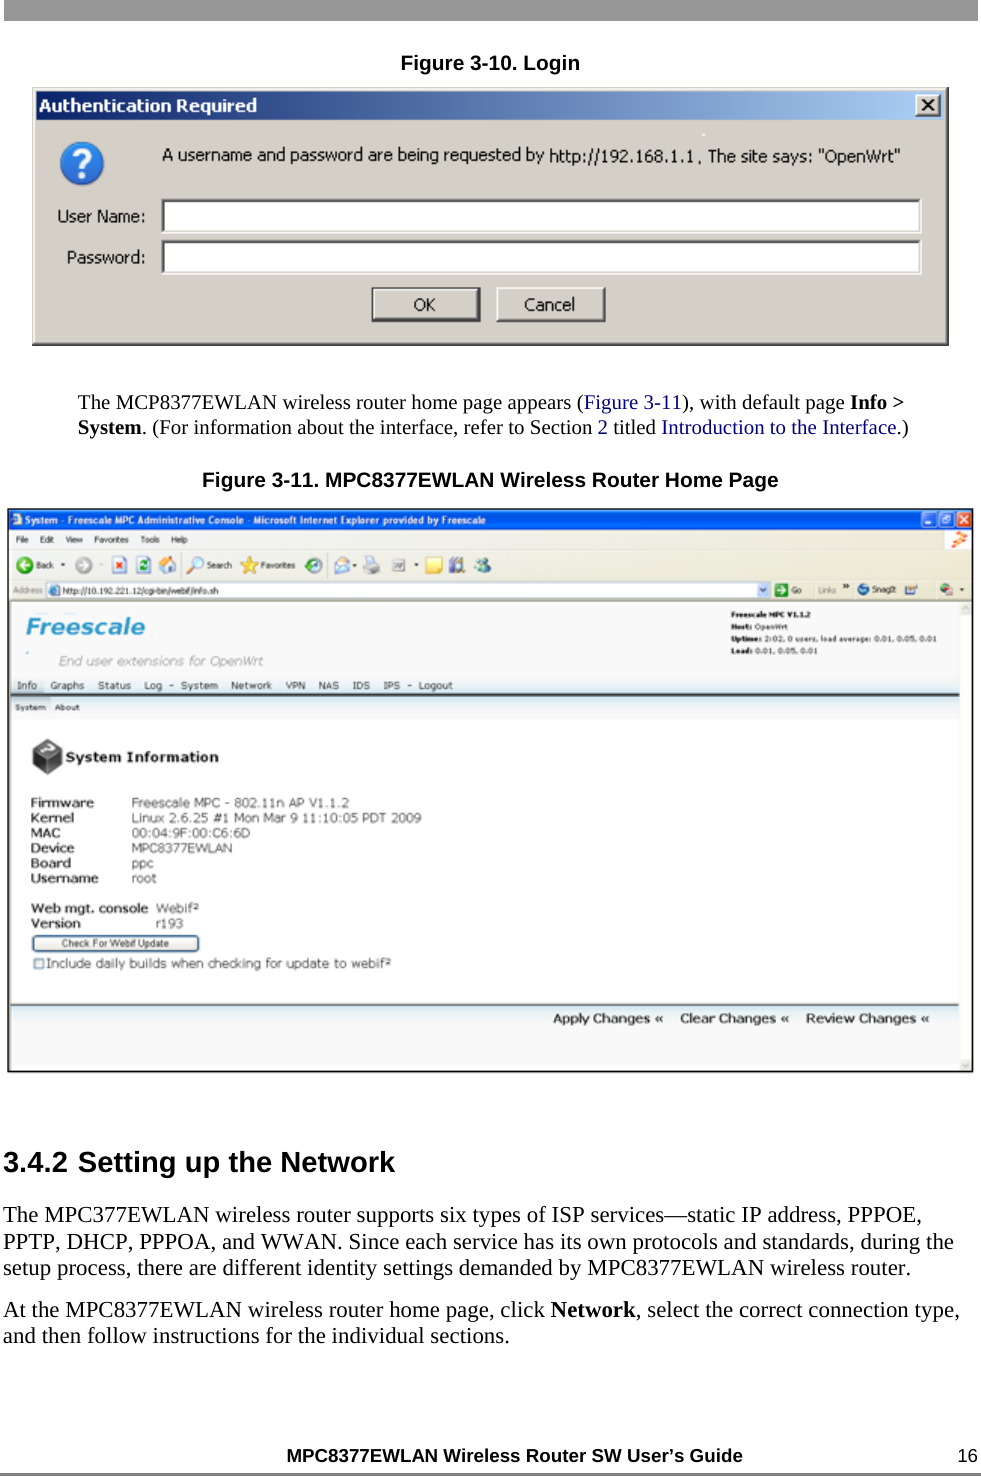                                                          MPC8377EWLAN Wireless Router SW User’s Guide    16 Figure 3-10. Login  The MCP8377EWLAN wireless router home page appears (Figure 3-11), with default page Info &gt; System. (For information about the interface, refer to Section 2 titled Introduction to the Interface.) Figure 3-11. MPC8377EWLAN Wireless Router Home Page  3.4.2 Setting up the Network The MPC377EWLAN wireless router supports six types of ISP services—static IP address, PPPOE, PPTP, DHCP, PPPOA, and WWAN. Since each service has its own protocols and standards, during the setup process, there are different identity settings demanded by MPC8377EWLAN wireless router. At the MPC8377EWLAN wireless router home page, click Network, select the correct connection type, and then follow instructions for the individual sections. 